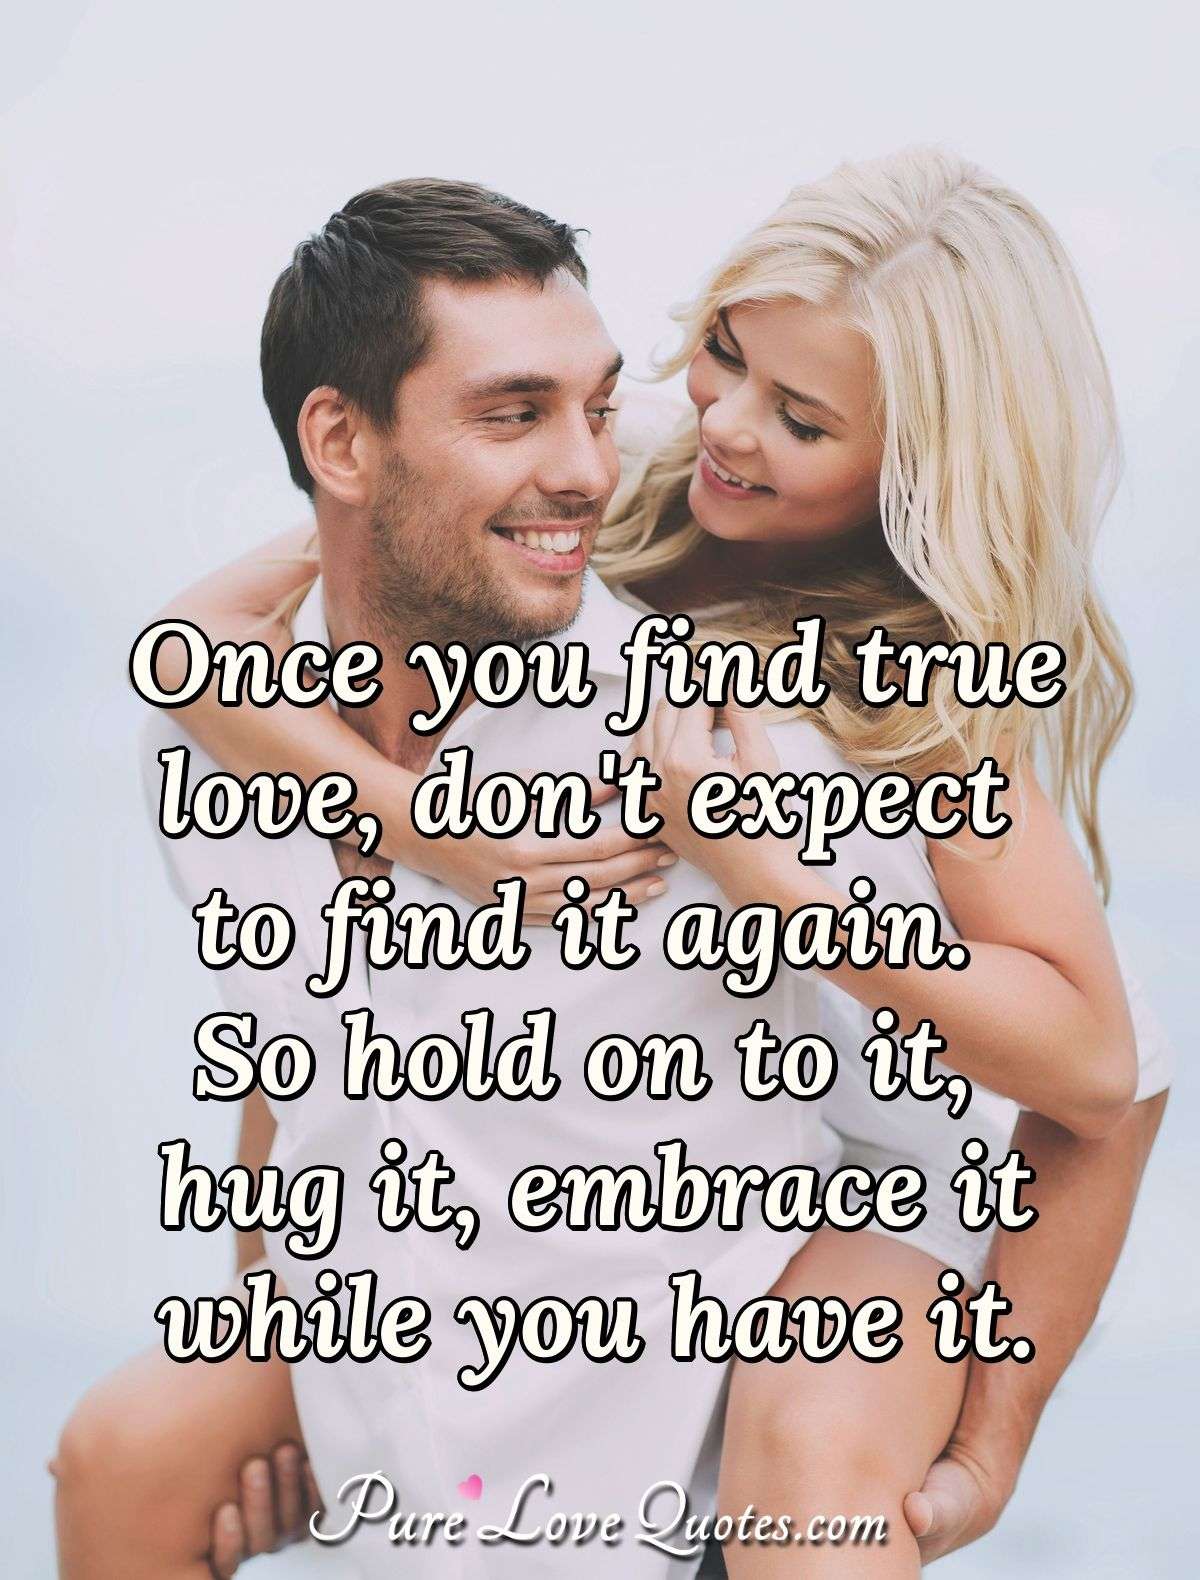 Once you find true love, don't expect to find it again. So hold on to it, hug it, embrace it while you have it. - Anonymous